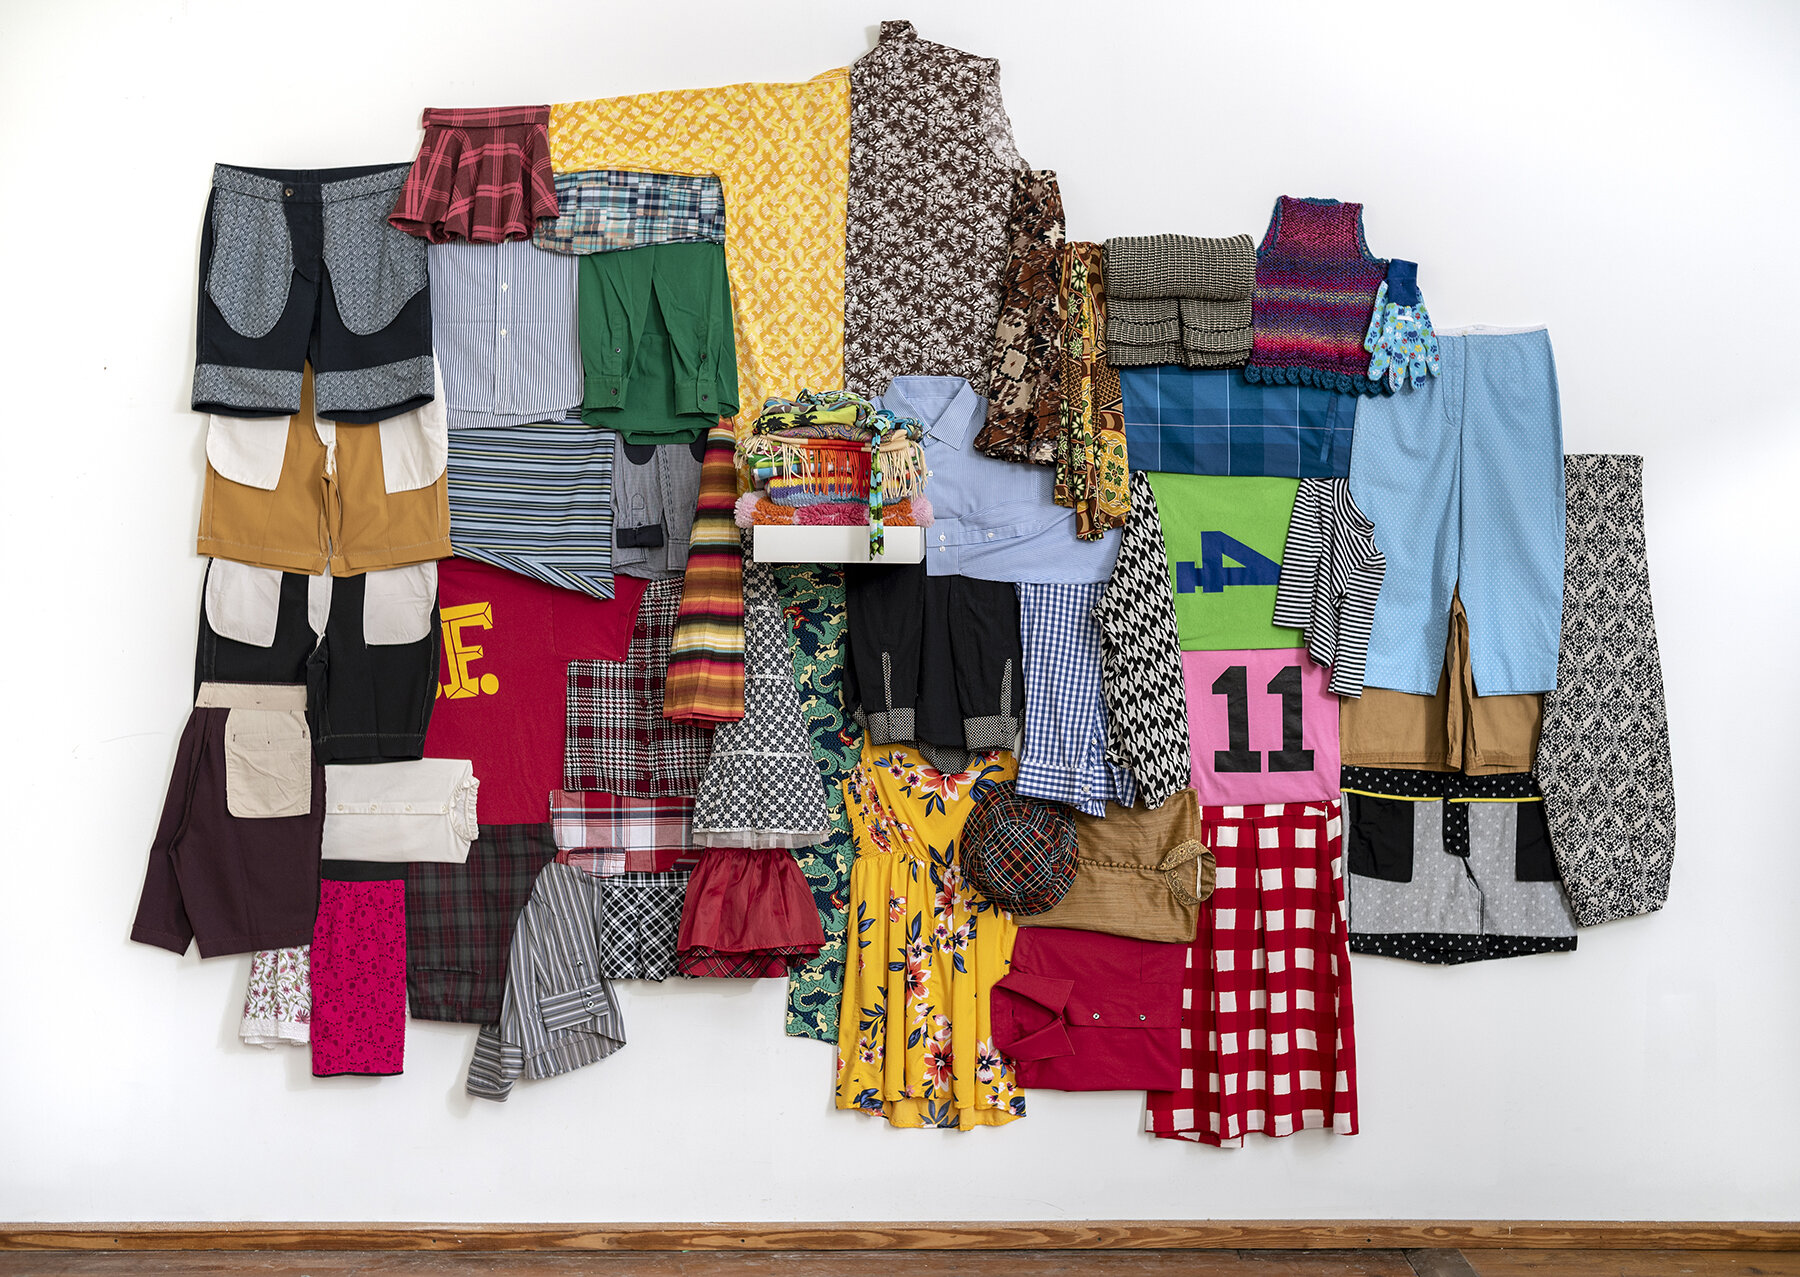   First Heave  Reclaimed garments, shelf, pins 80 x 120 x 12” Produced with the support of the Pollock - Krasner Foundation 2019 